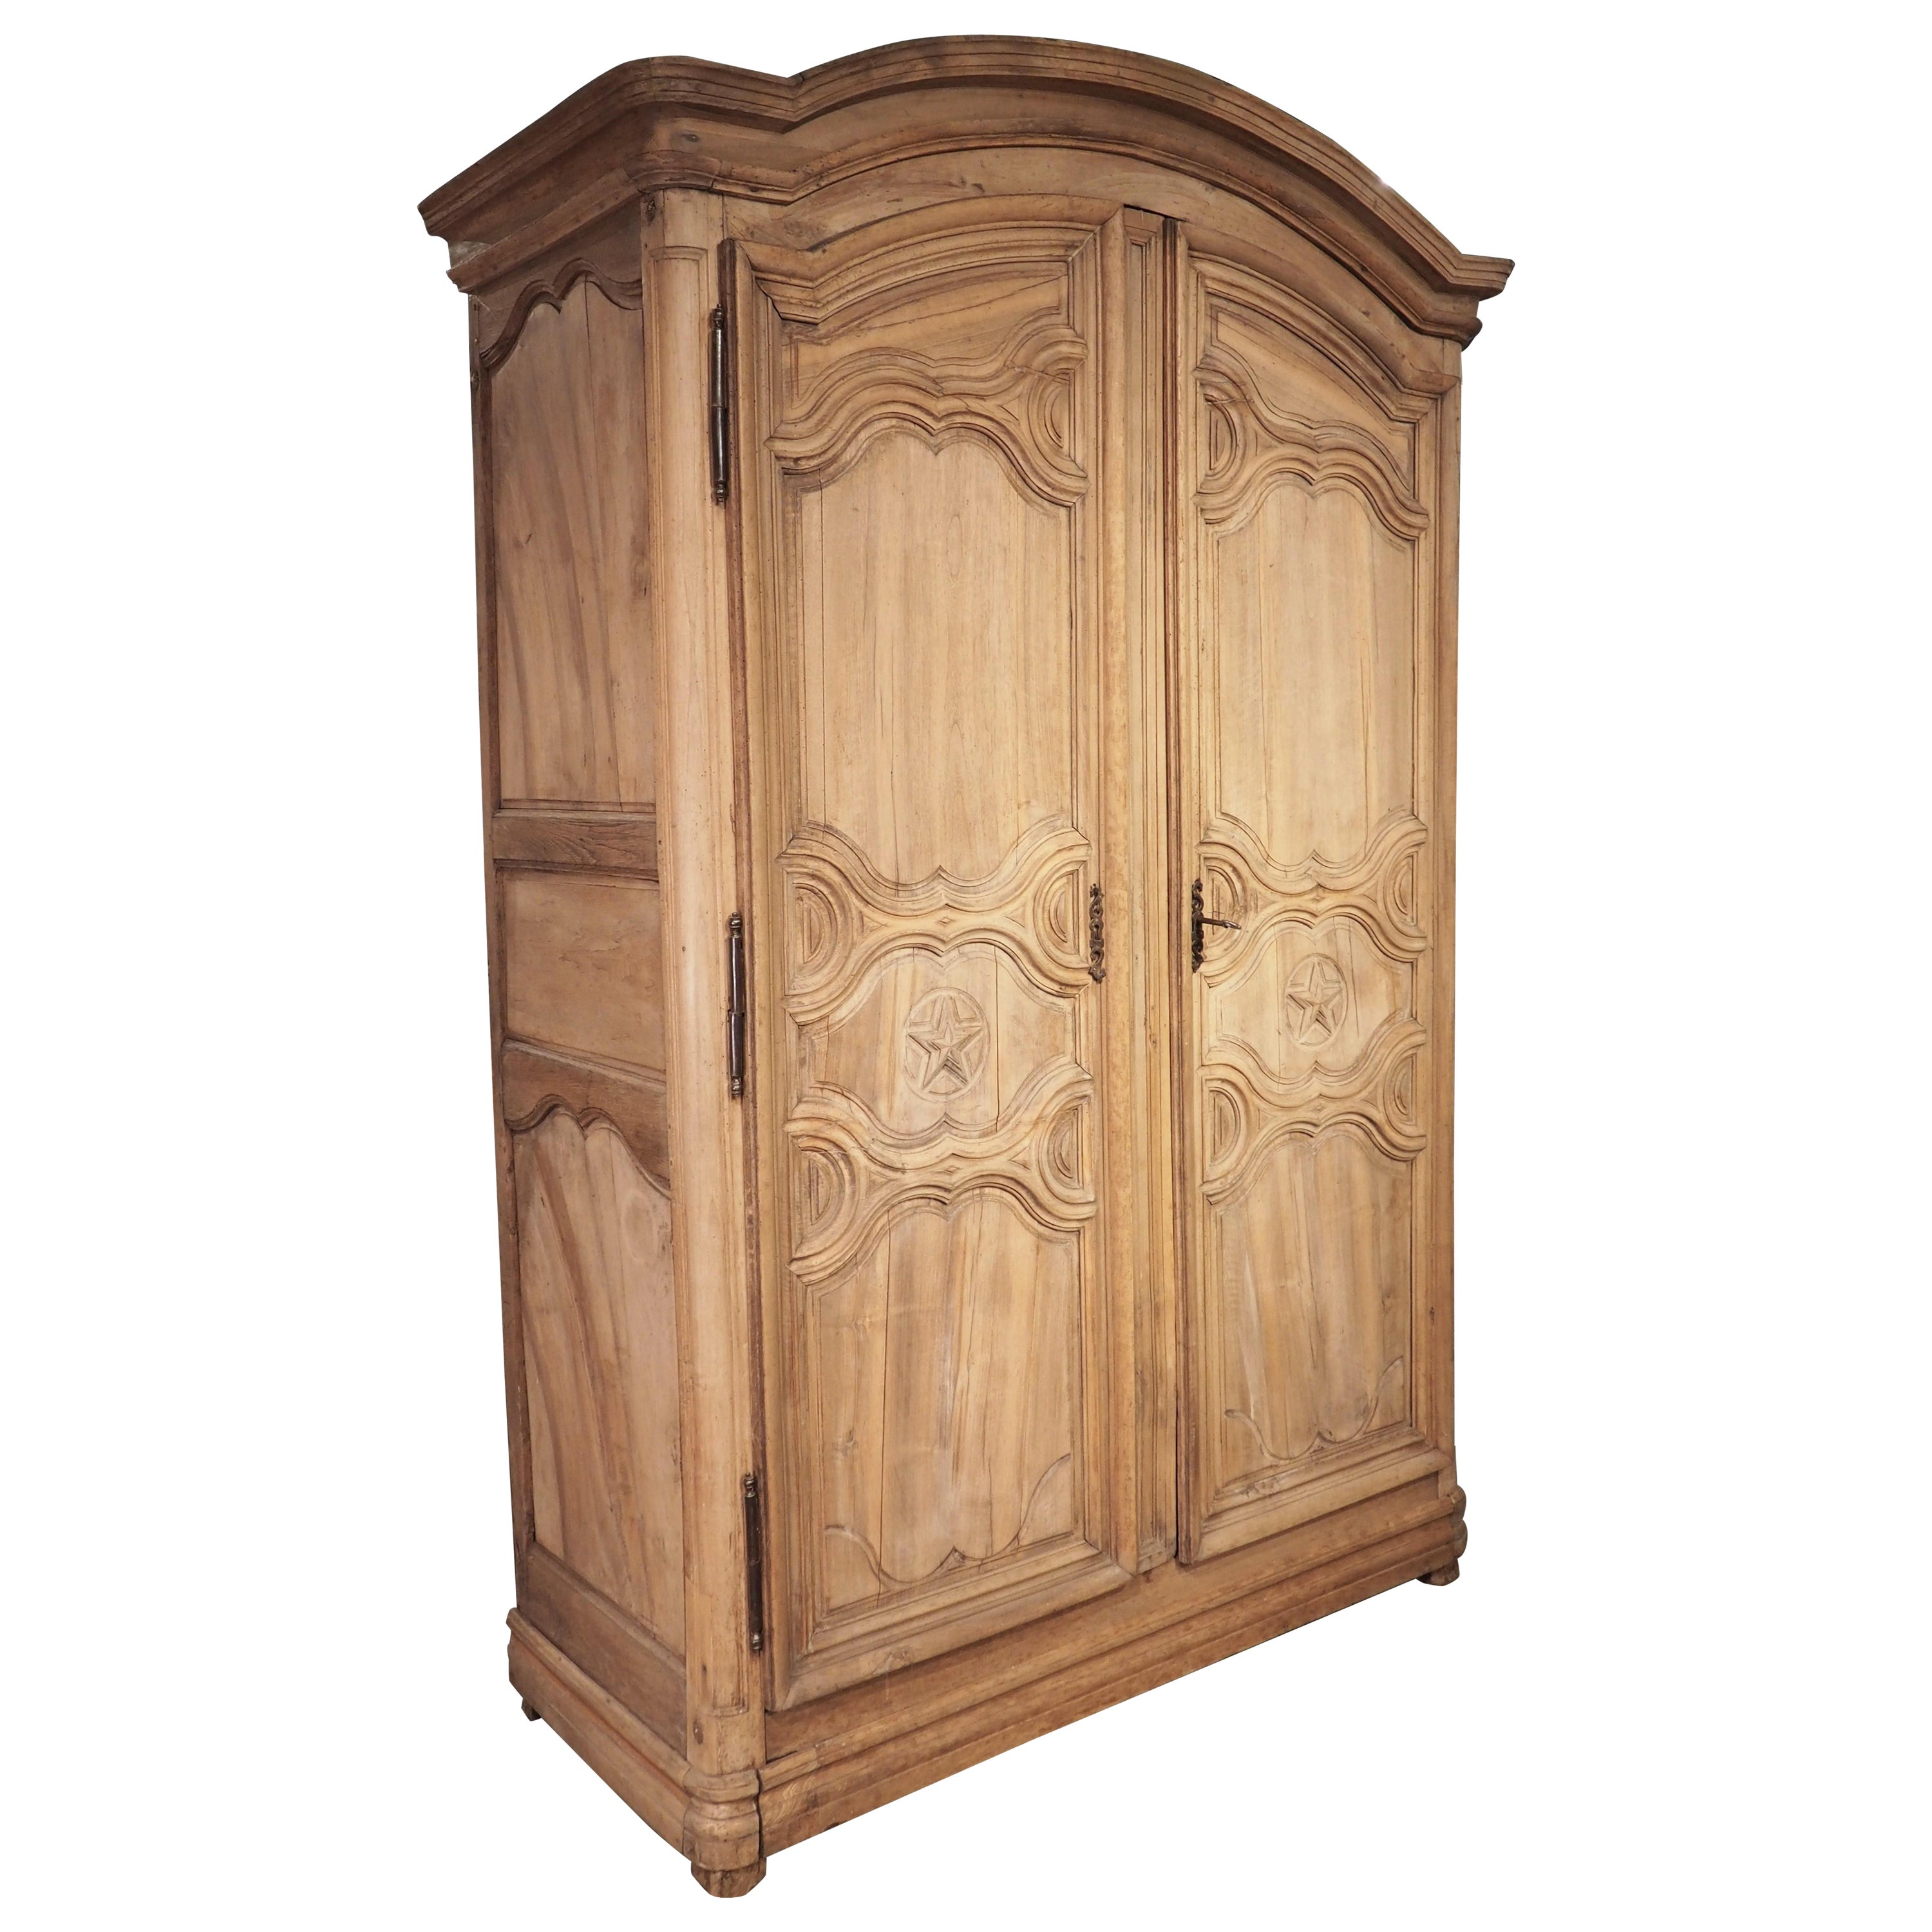 Early 18th Century Bleached French Walnut Armoire from the Île-de-France Region For Sale